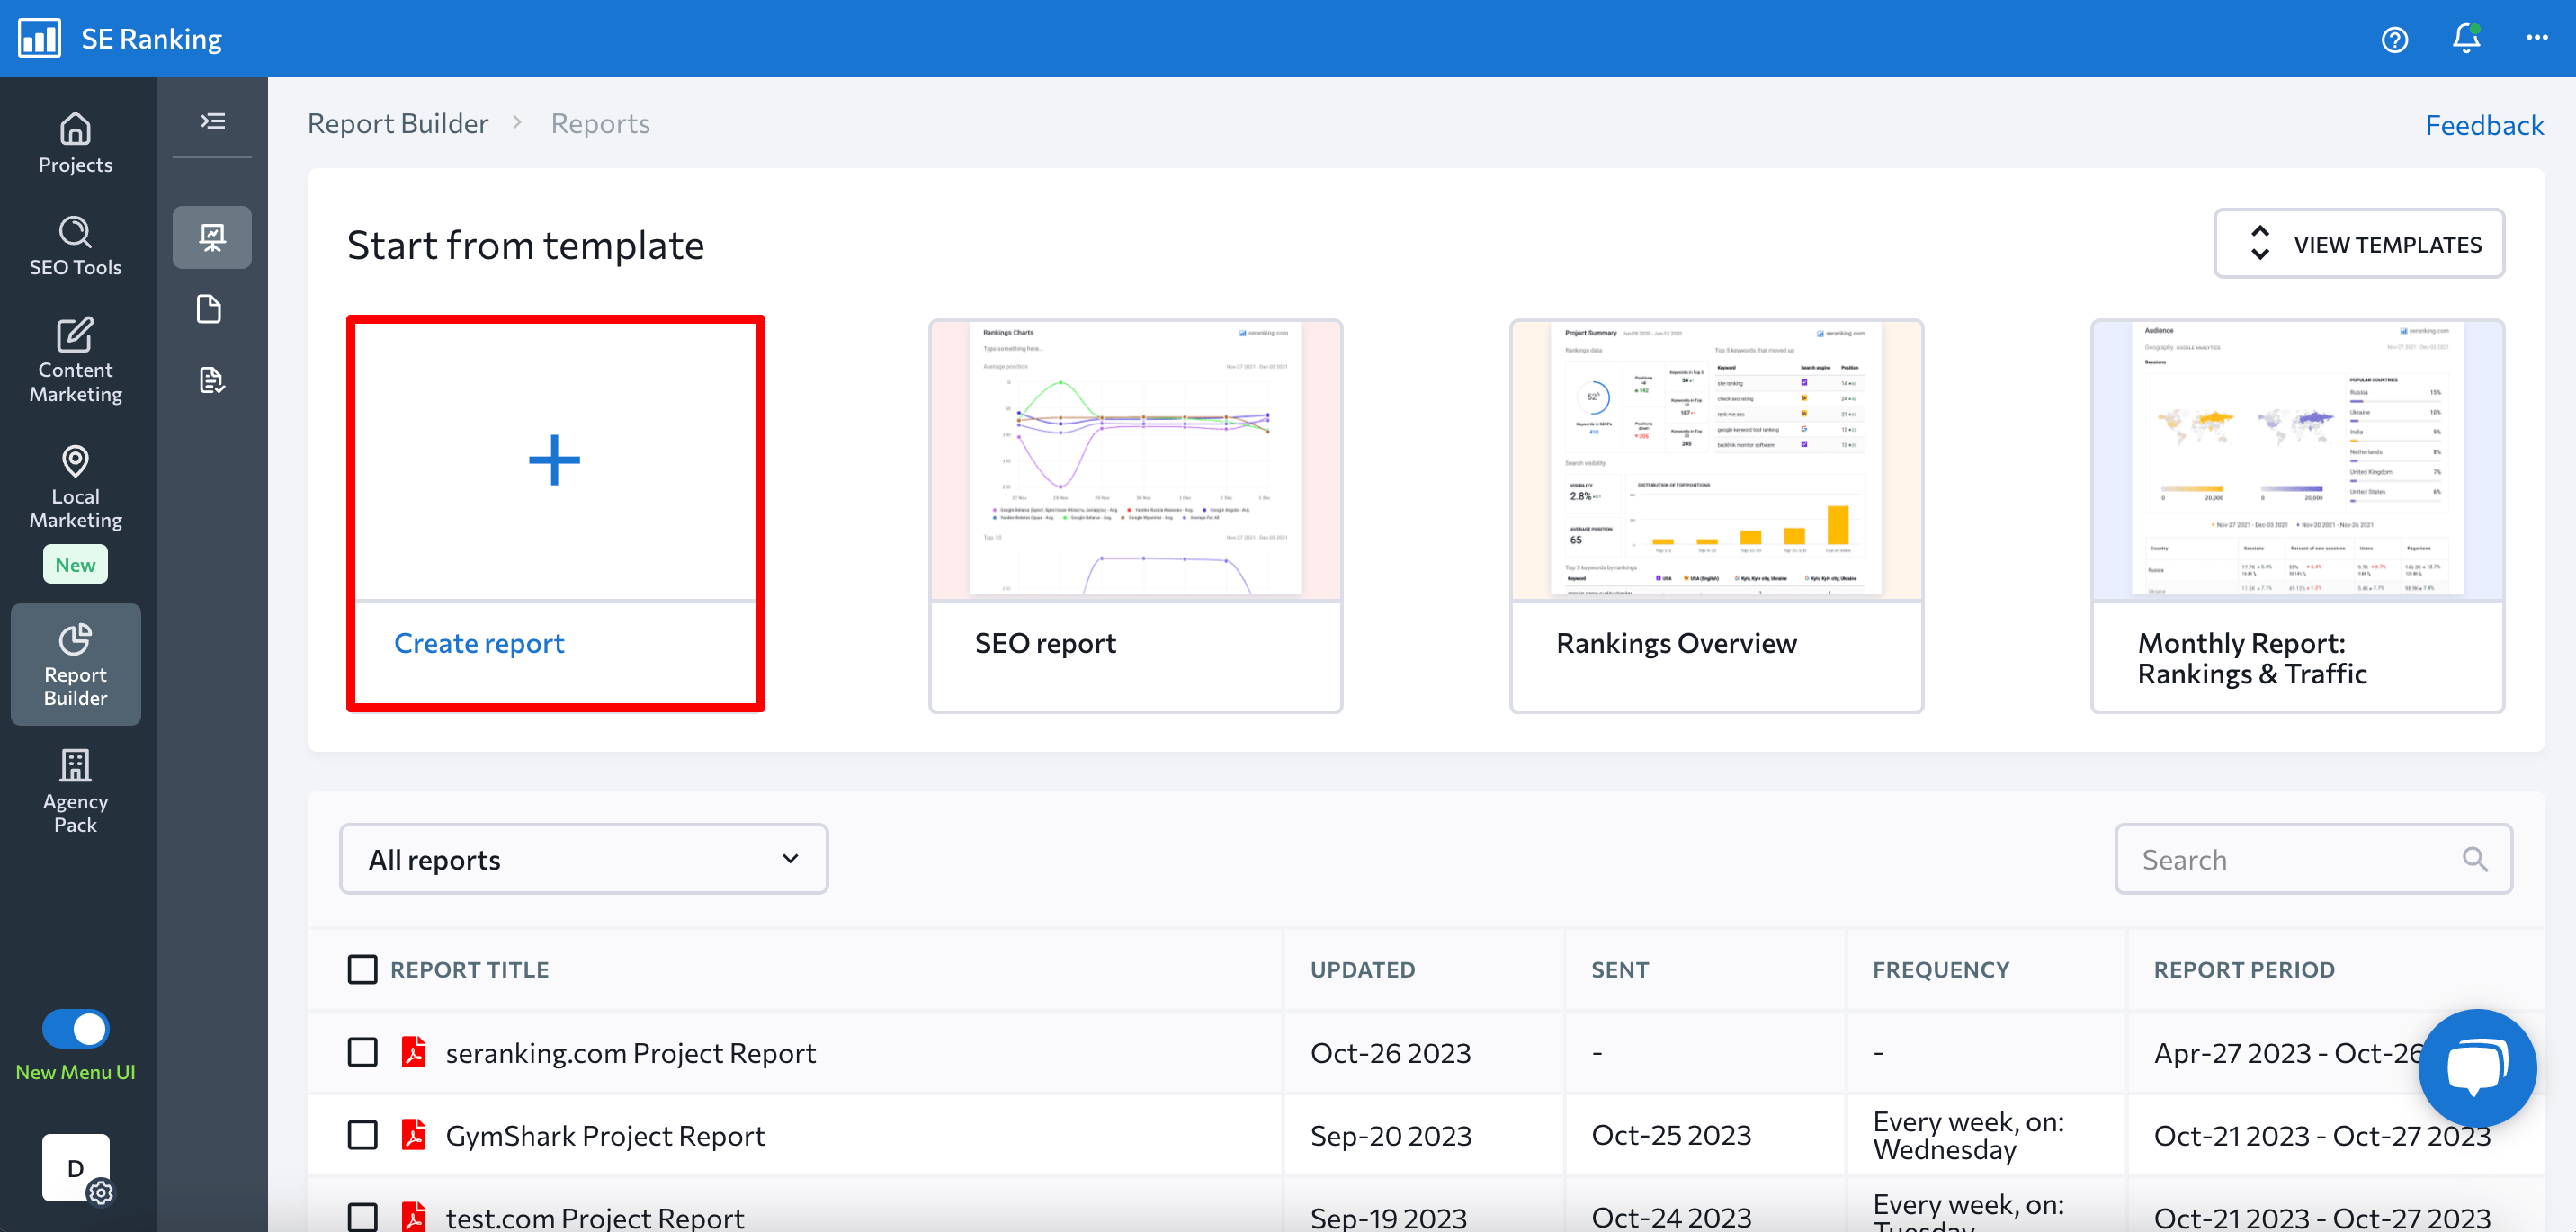 How to create reports in SE Ranking